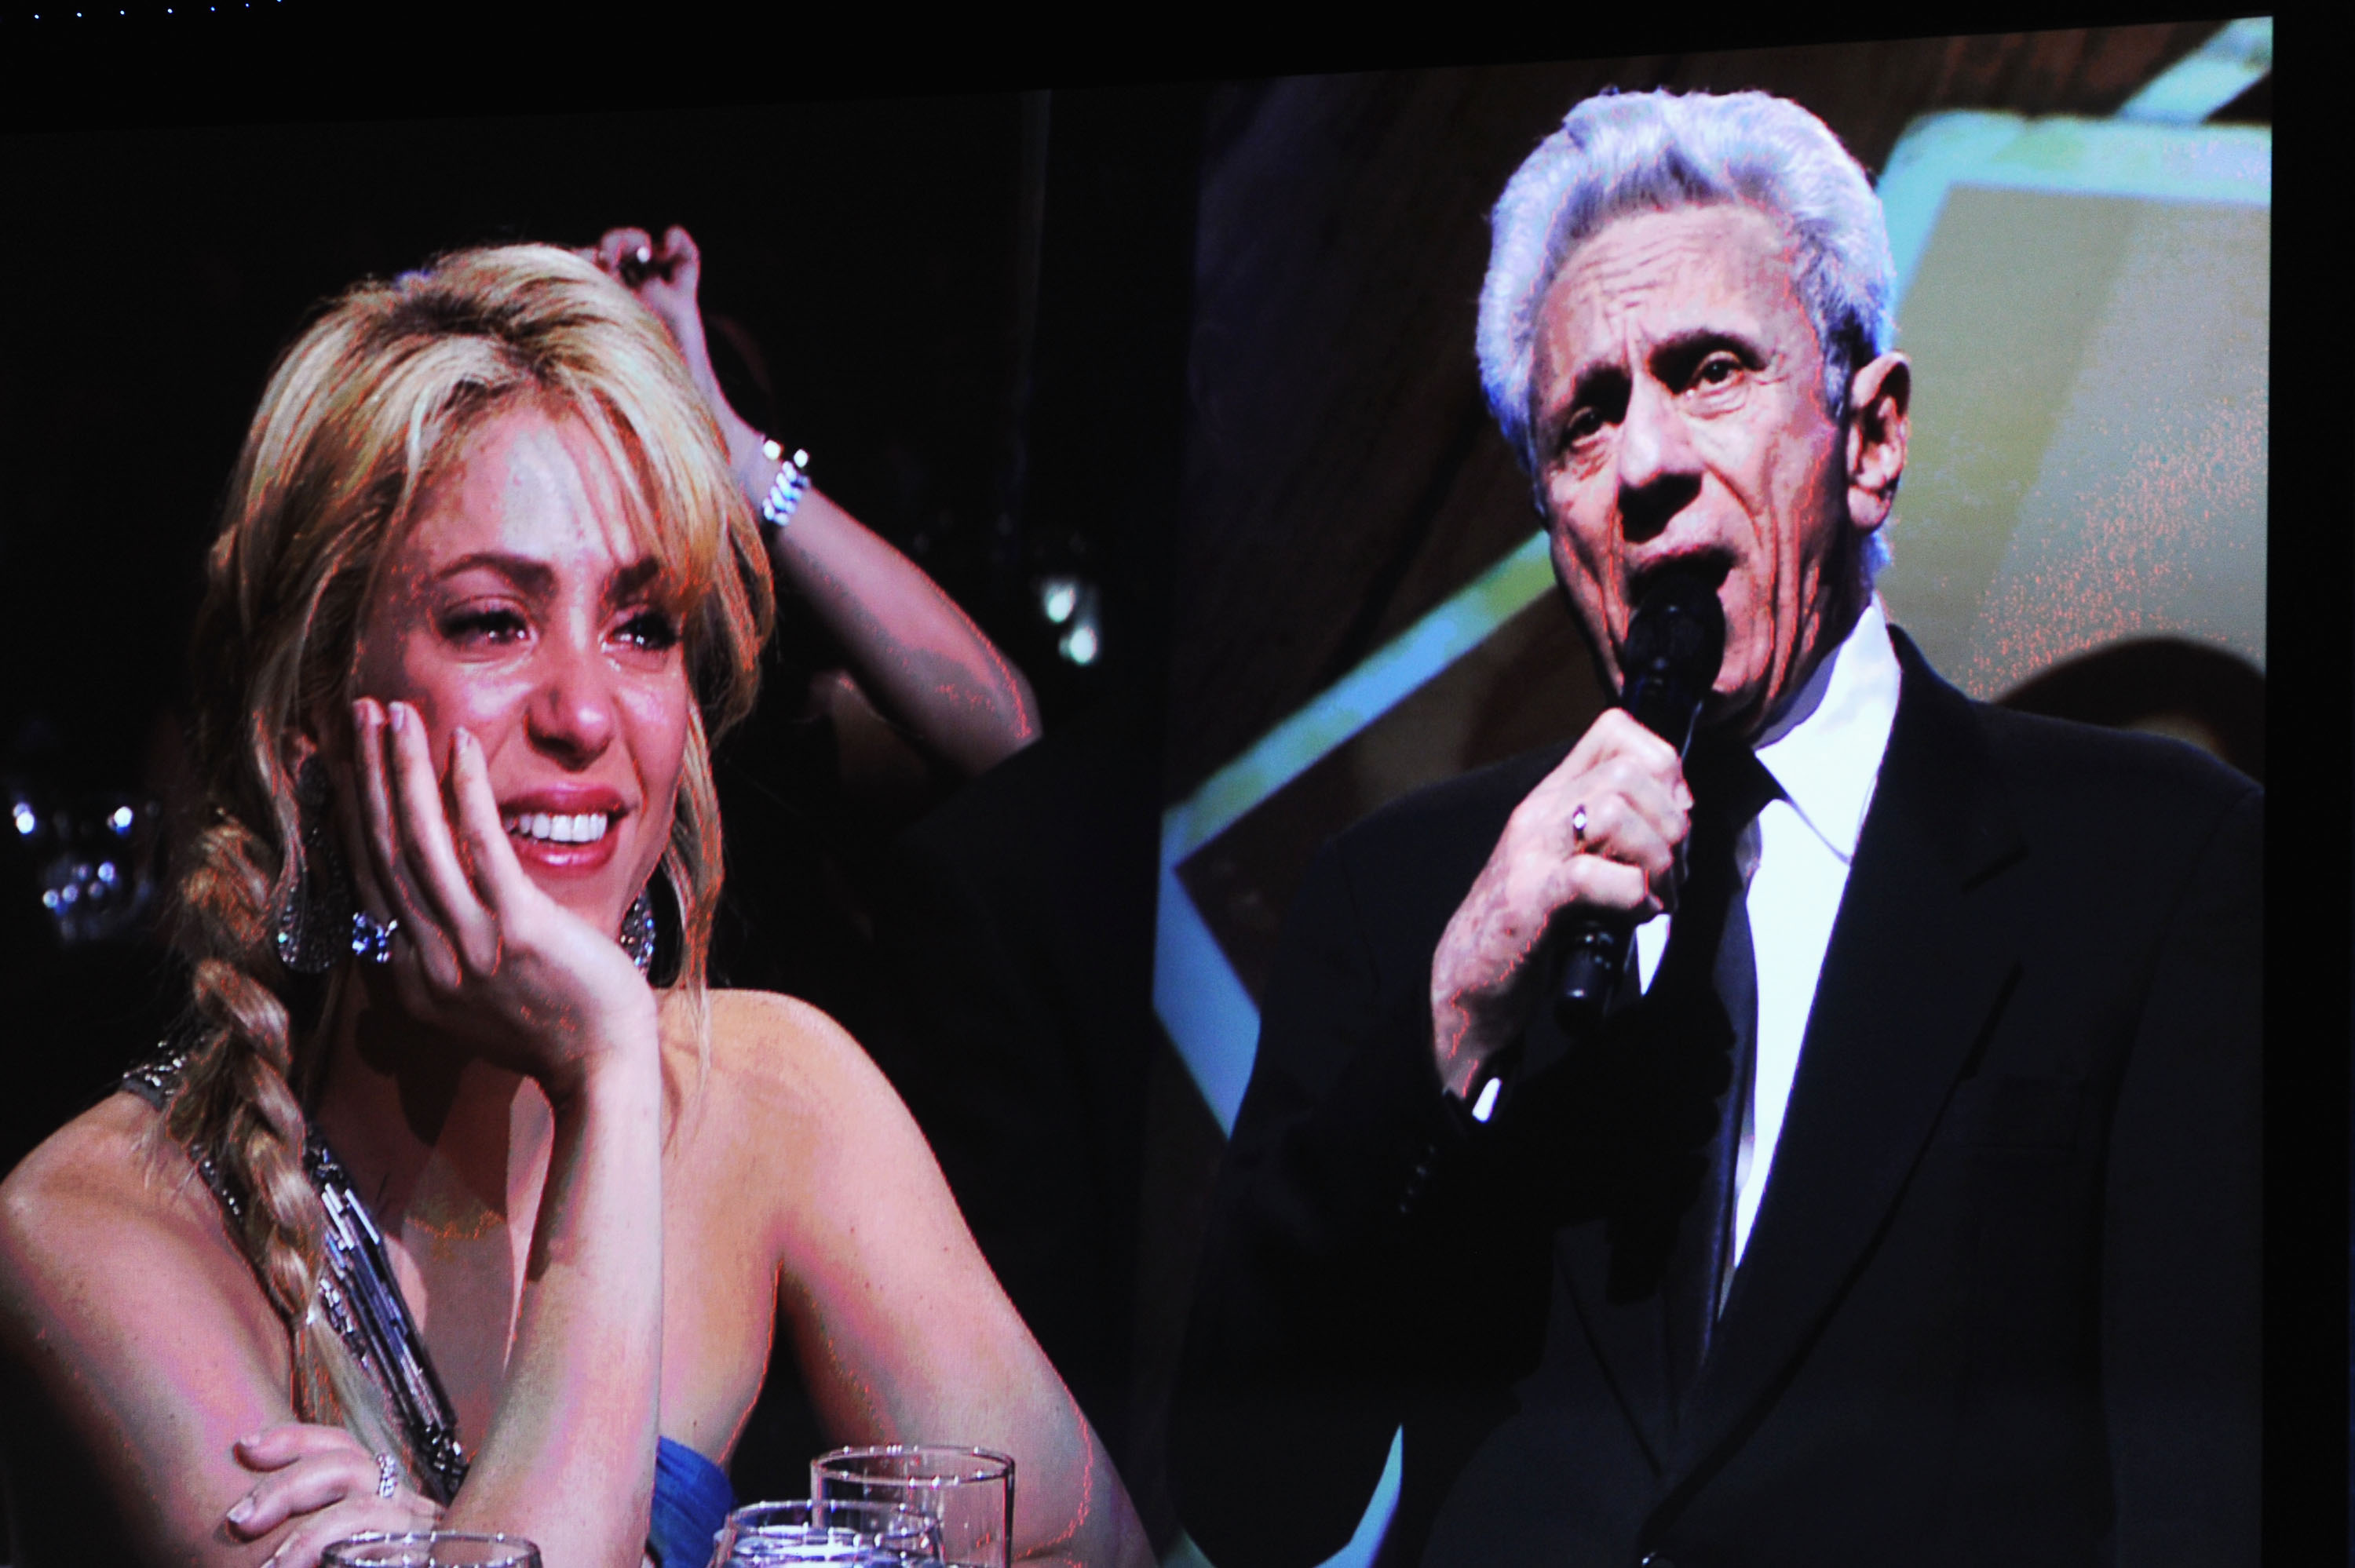 Shakira watches her father, William Mebarak Chadid perform onstage on November 9, 2011 in Las Vegas, Nevada. | Source: Getty Images